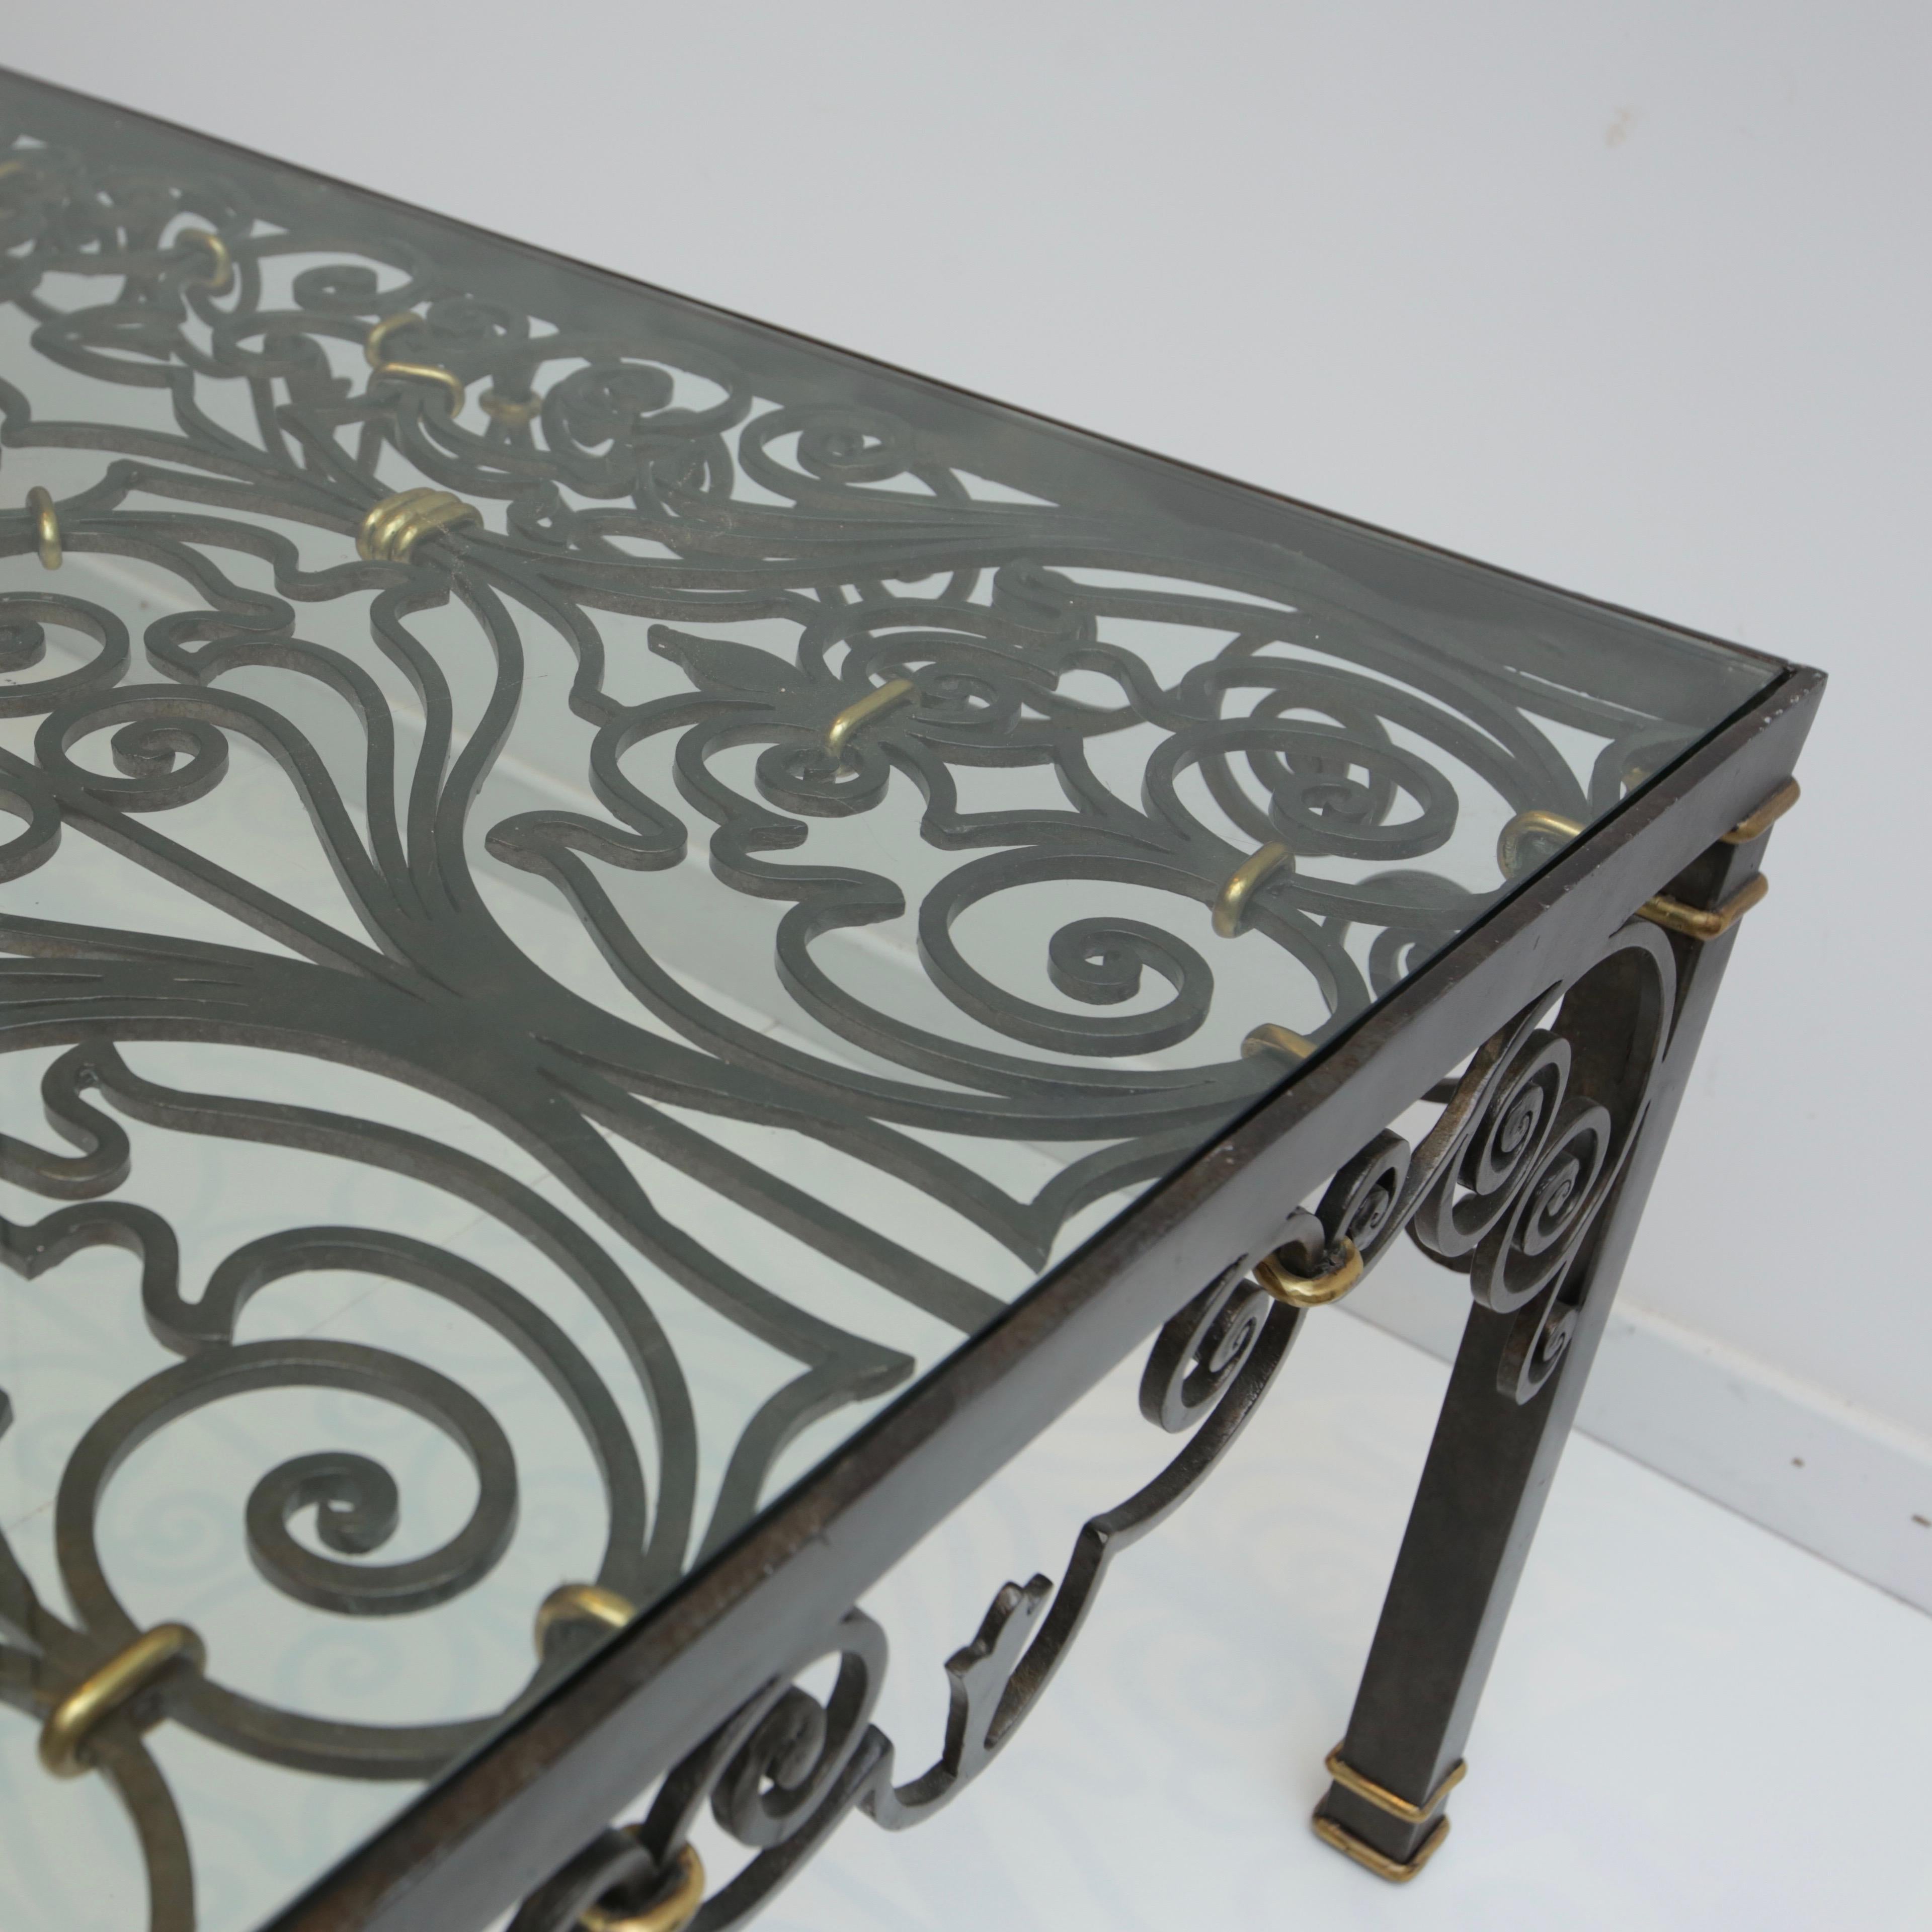 Iron Gate Coffee Table In Excellent Condition For Sale In New London, CT